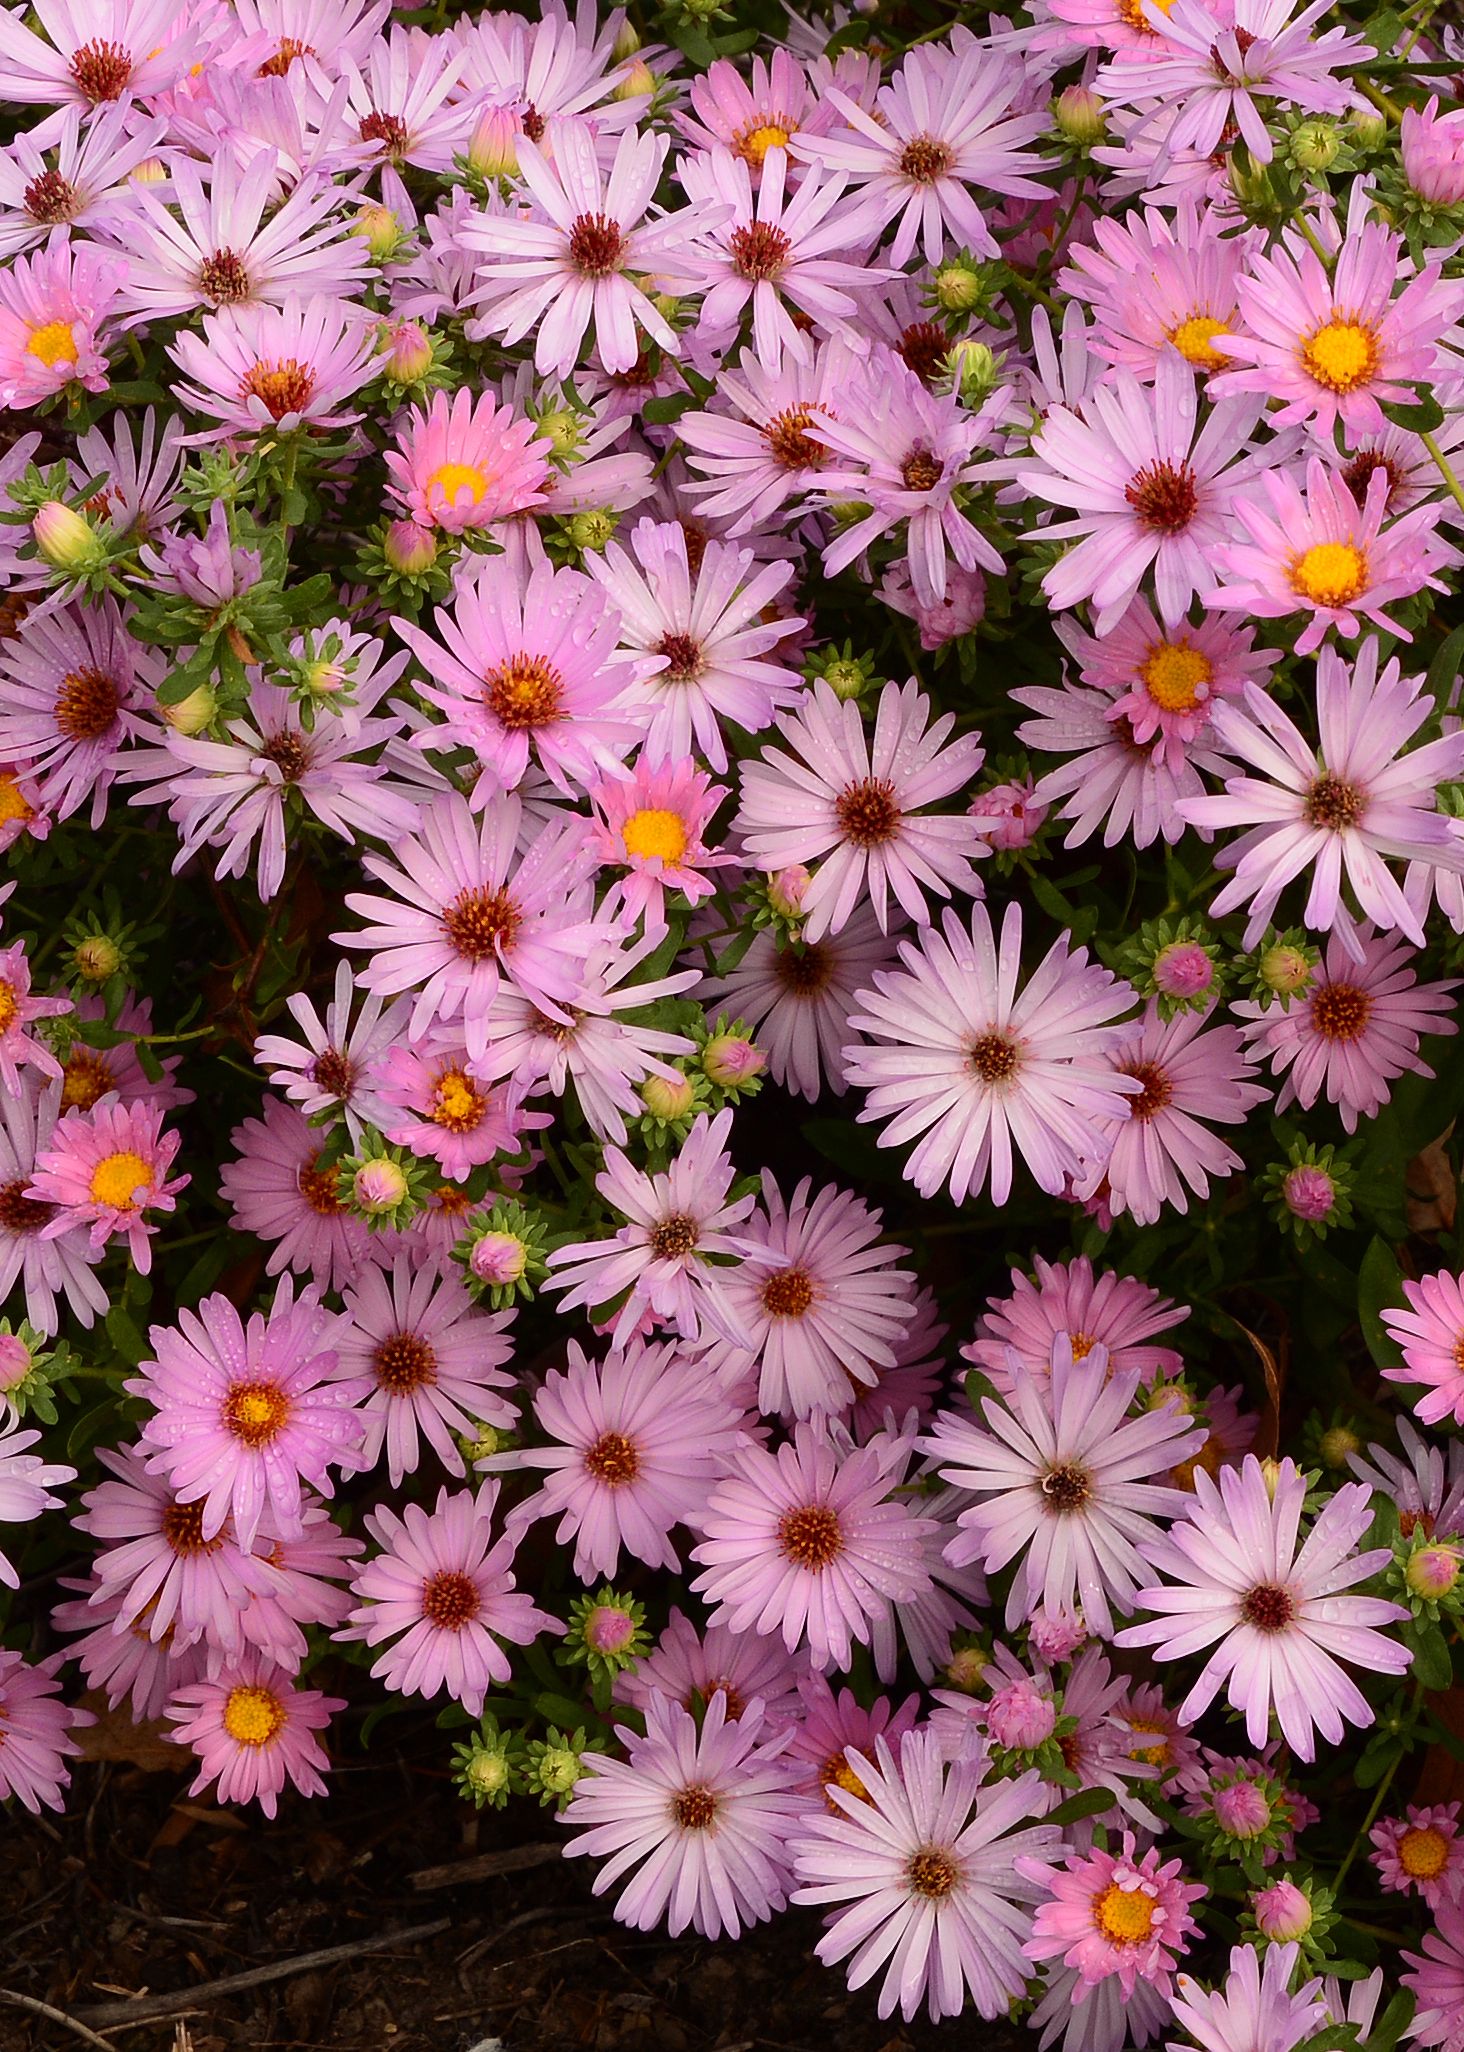 images/plants/aster/ast-billowing-pink/ast-billowing-pink-0008.jpg